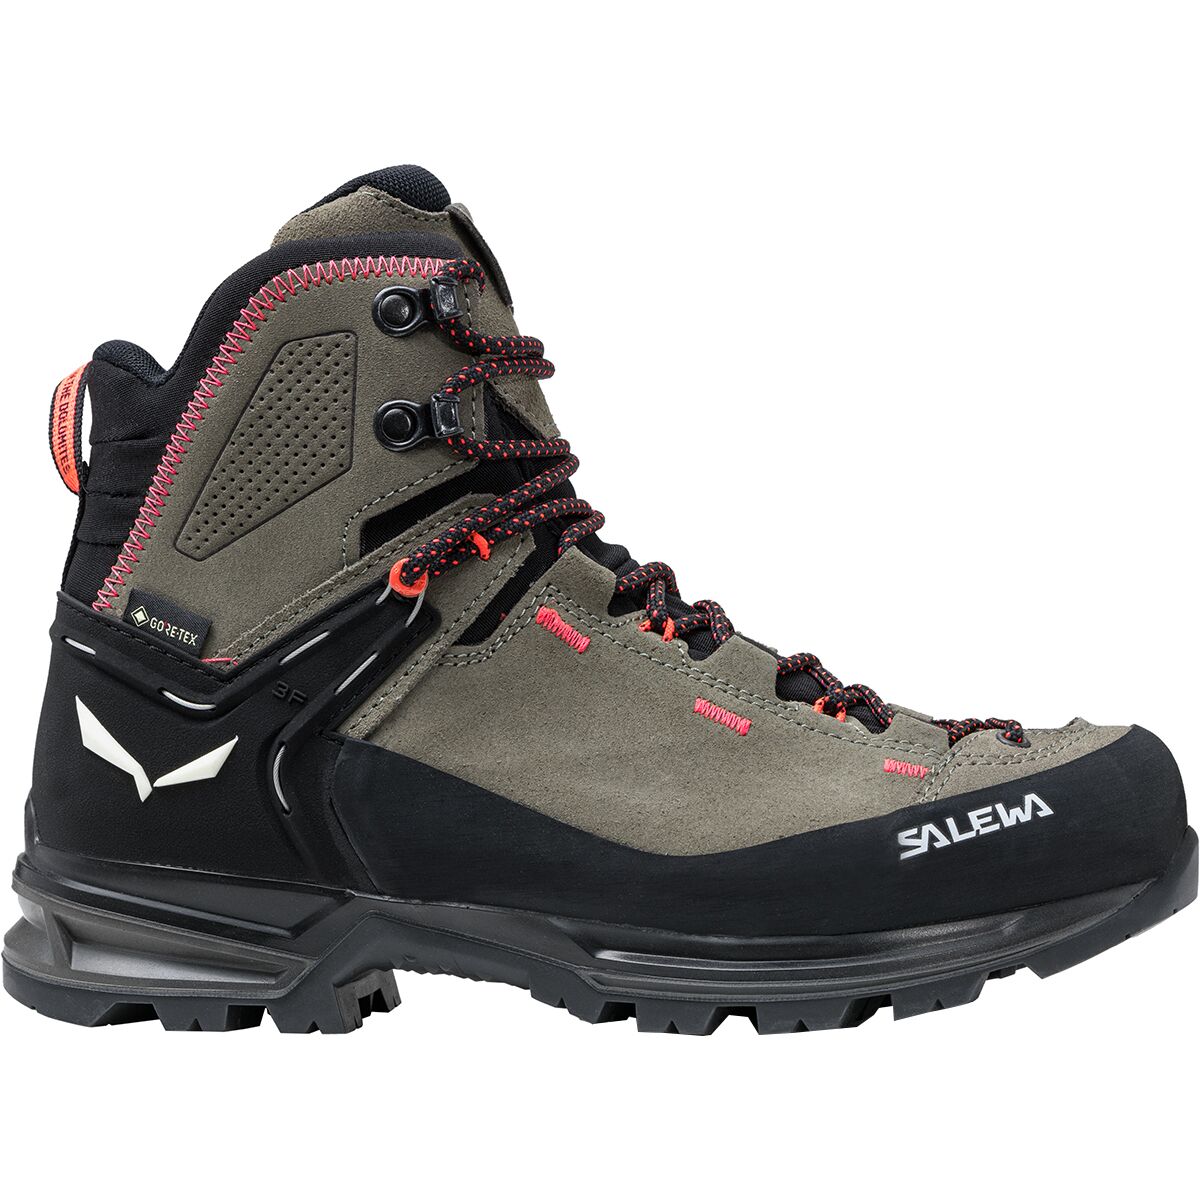 Mountain Trainer 2 Mid GTX Backpacking Boot - Women